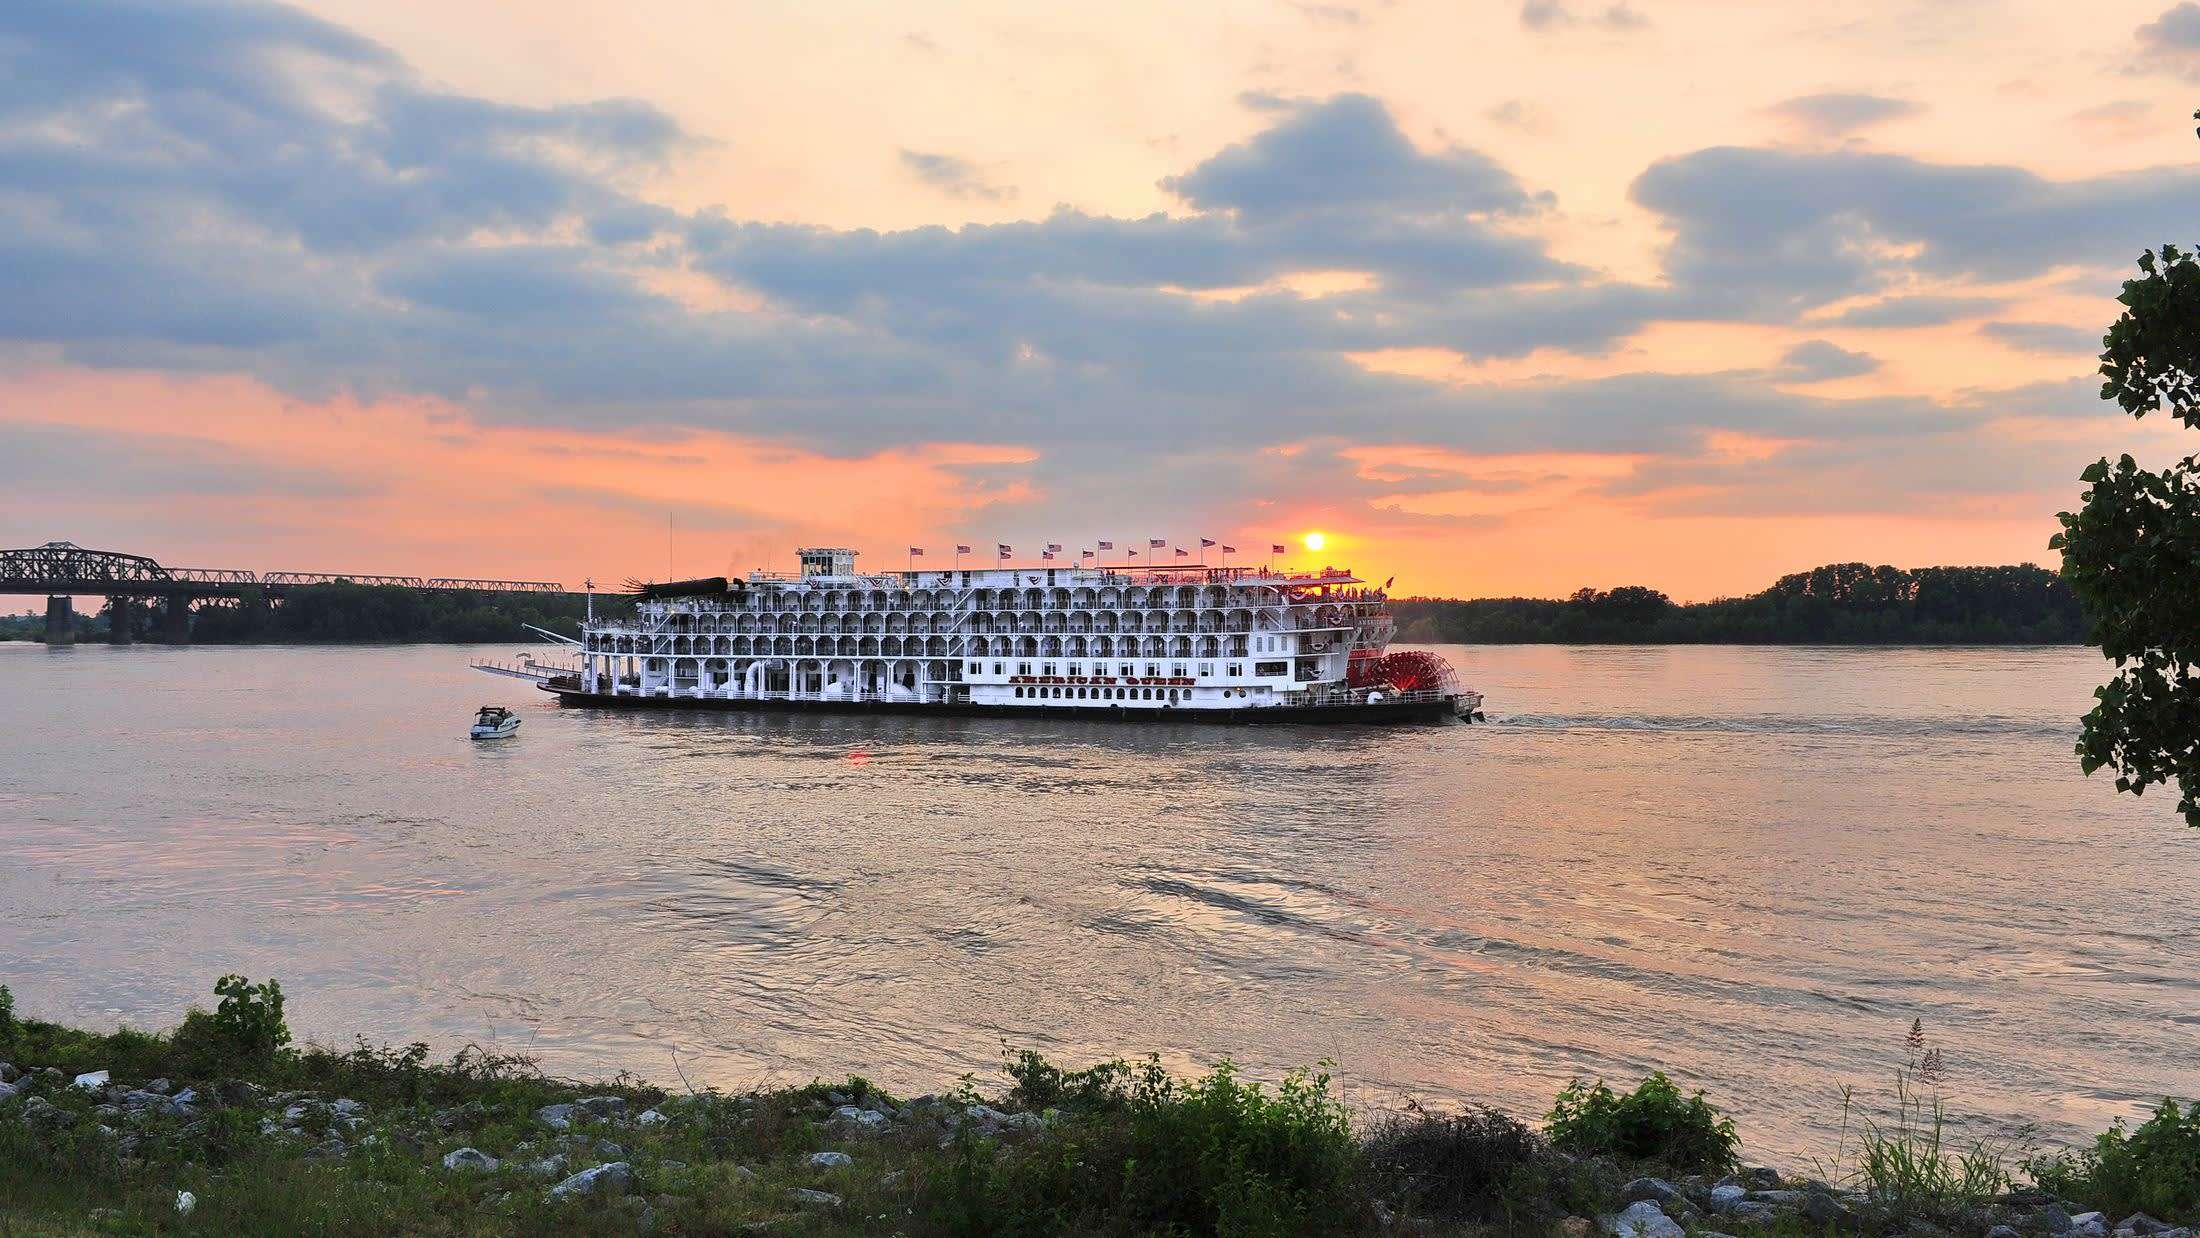 Bespoke Mississippi River Cruise Memphis to New Orleans